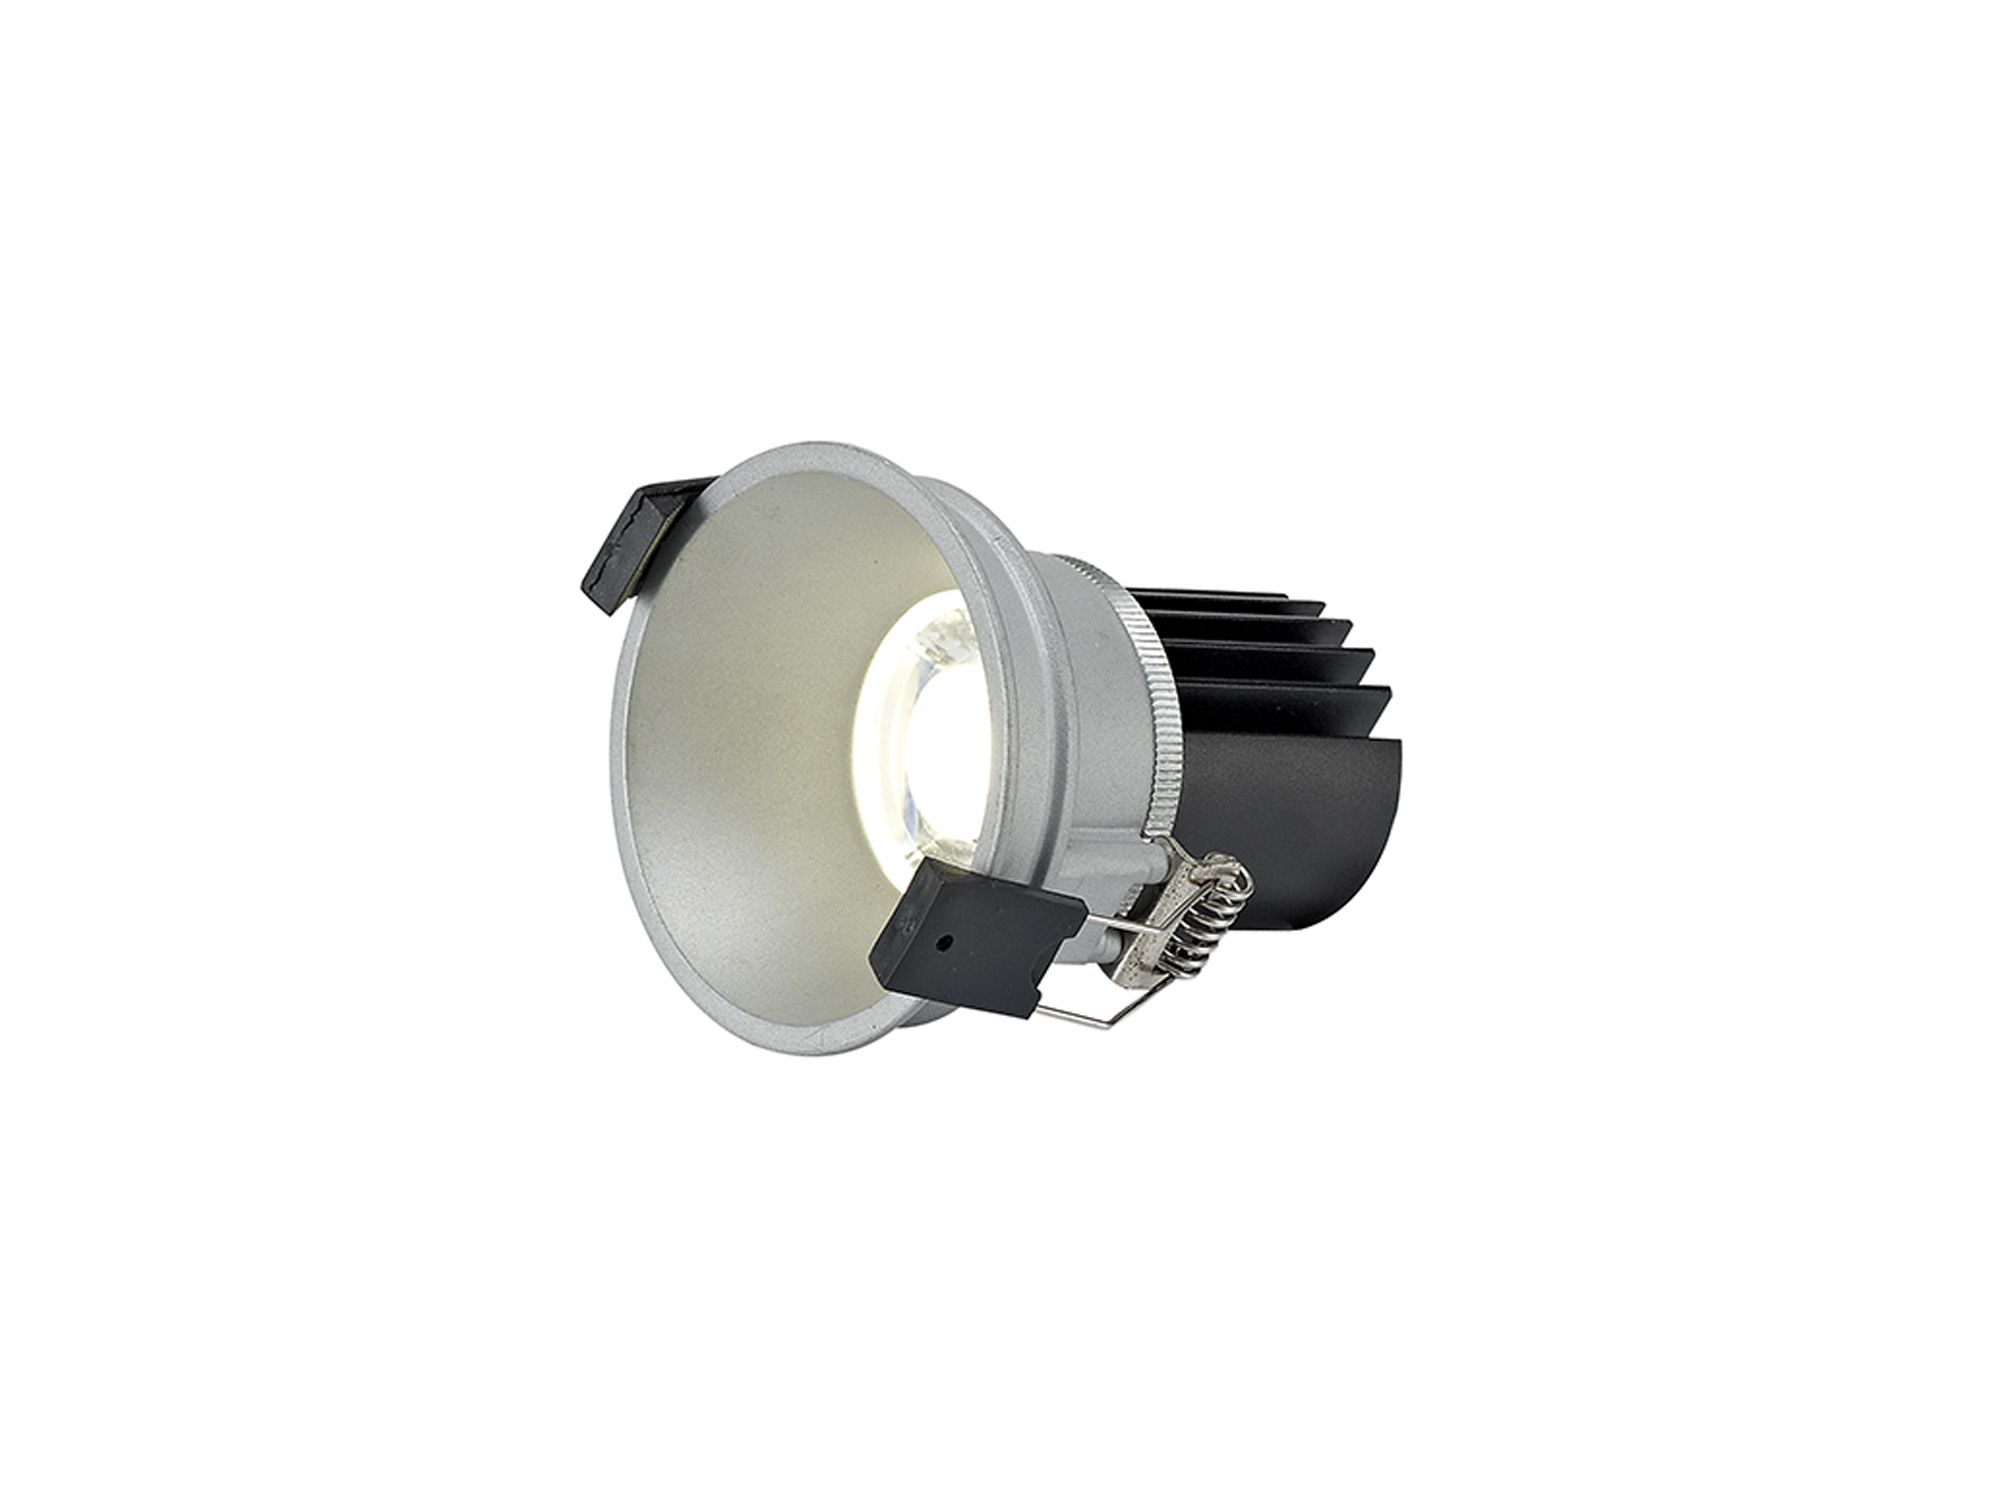 DM201640  Bania 9 Powered by Tridonic  9W 2700K 770lm 24° CRI>90 LED Engine, 250mA Silver Fixed Recessed Spotlight, IP20